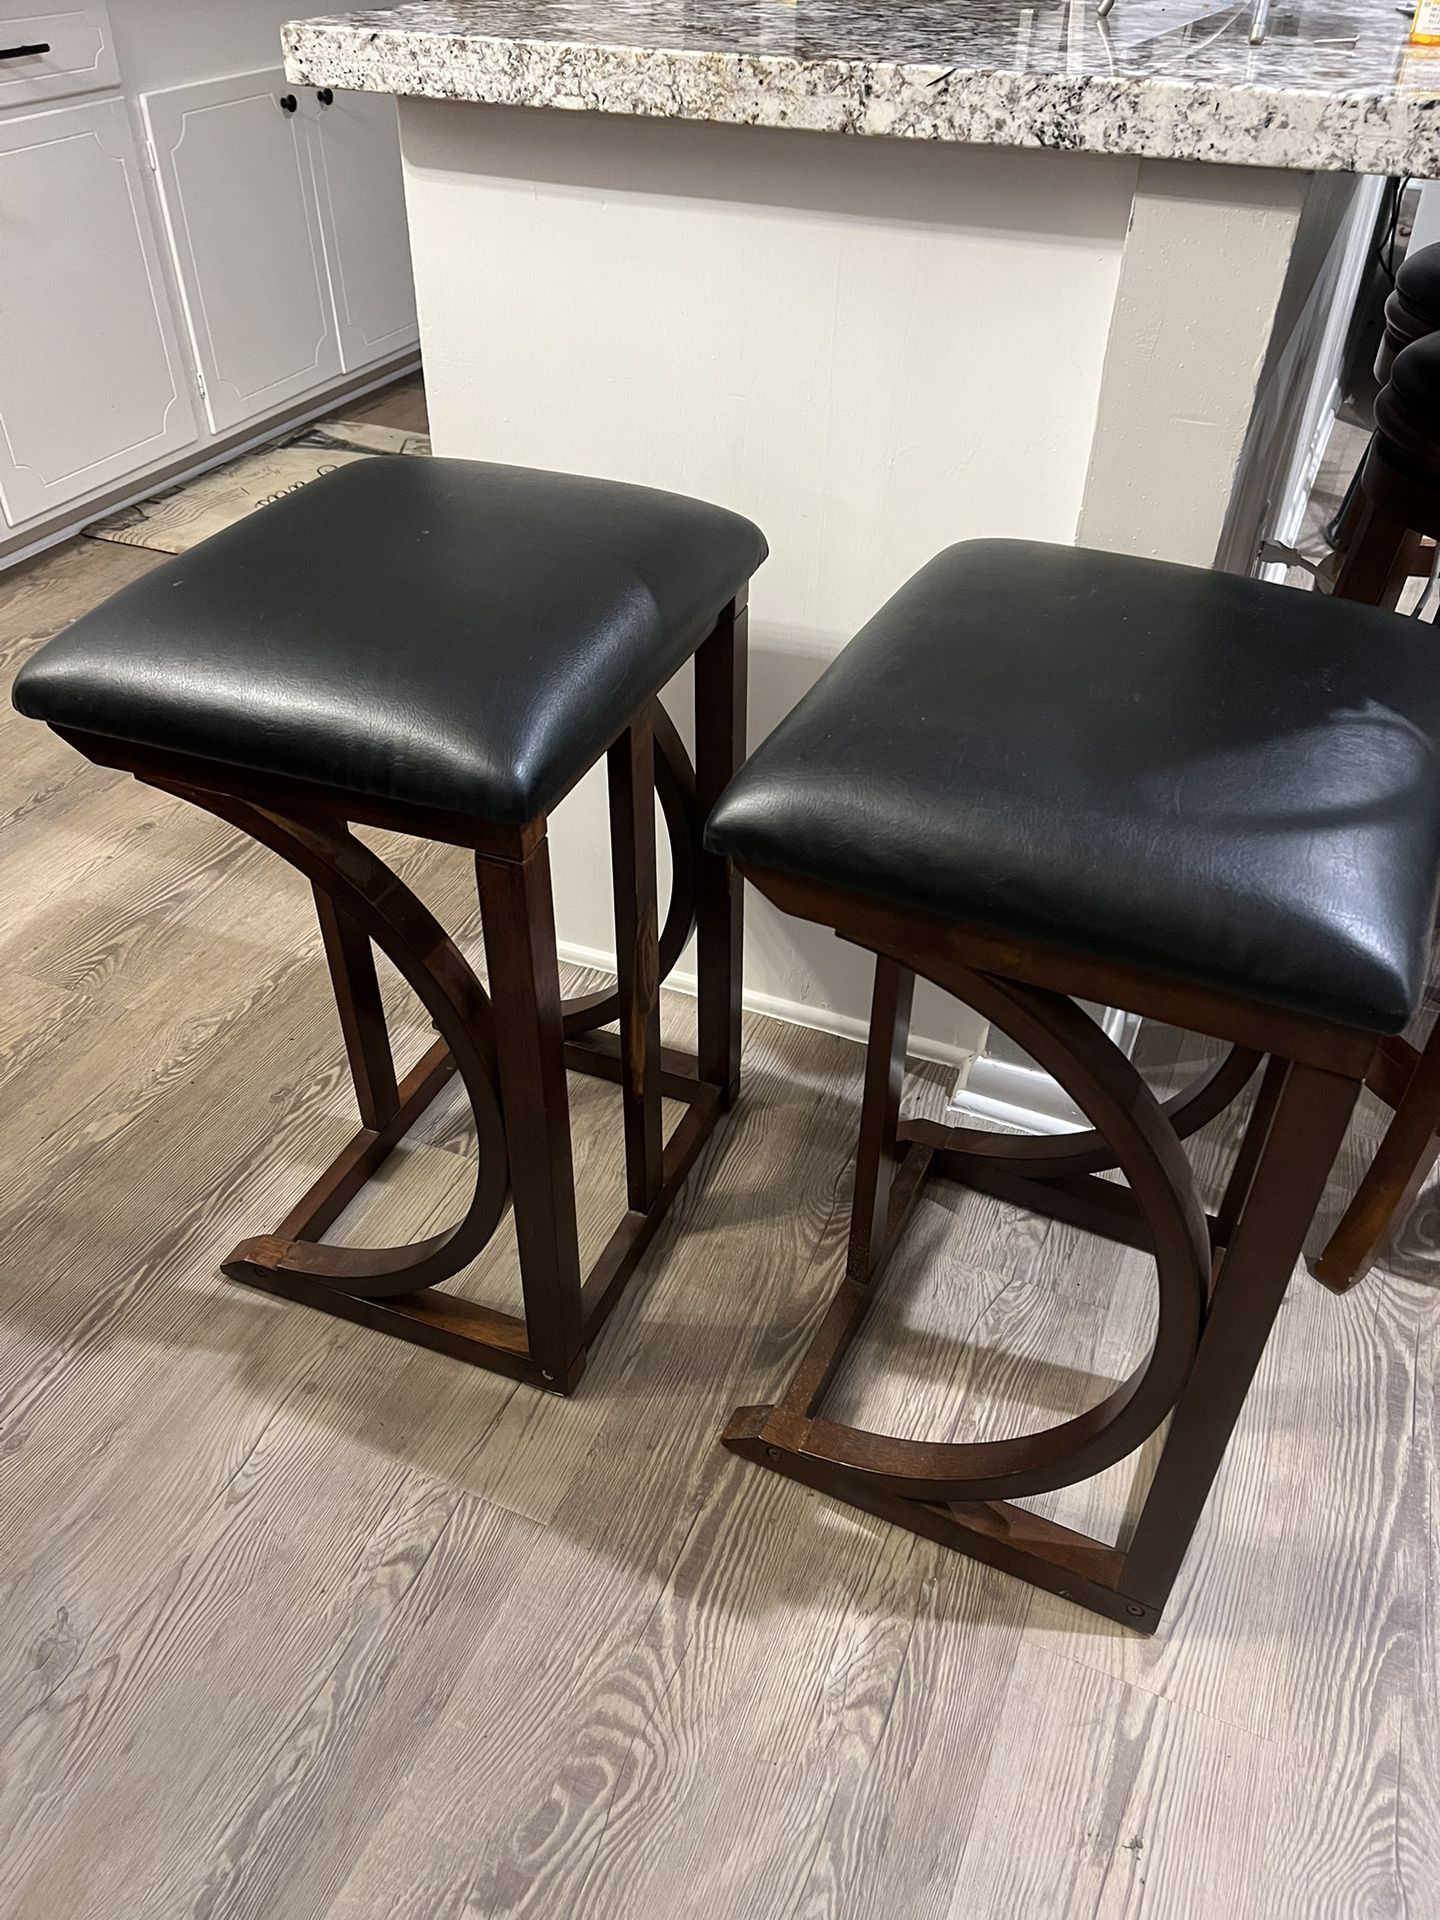 Imported Bar Stools Counter Height $50 Pair Or $25 Each